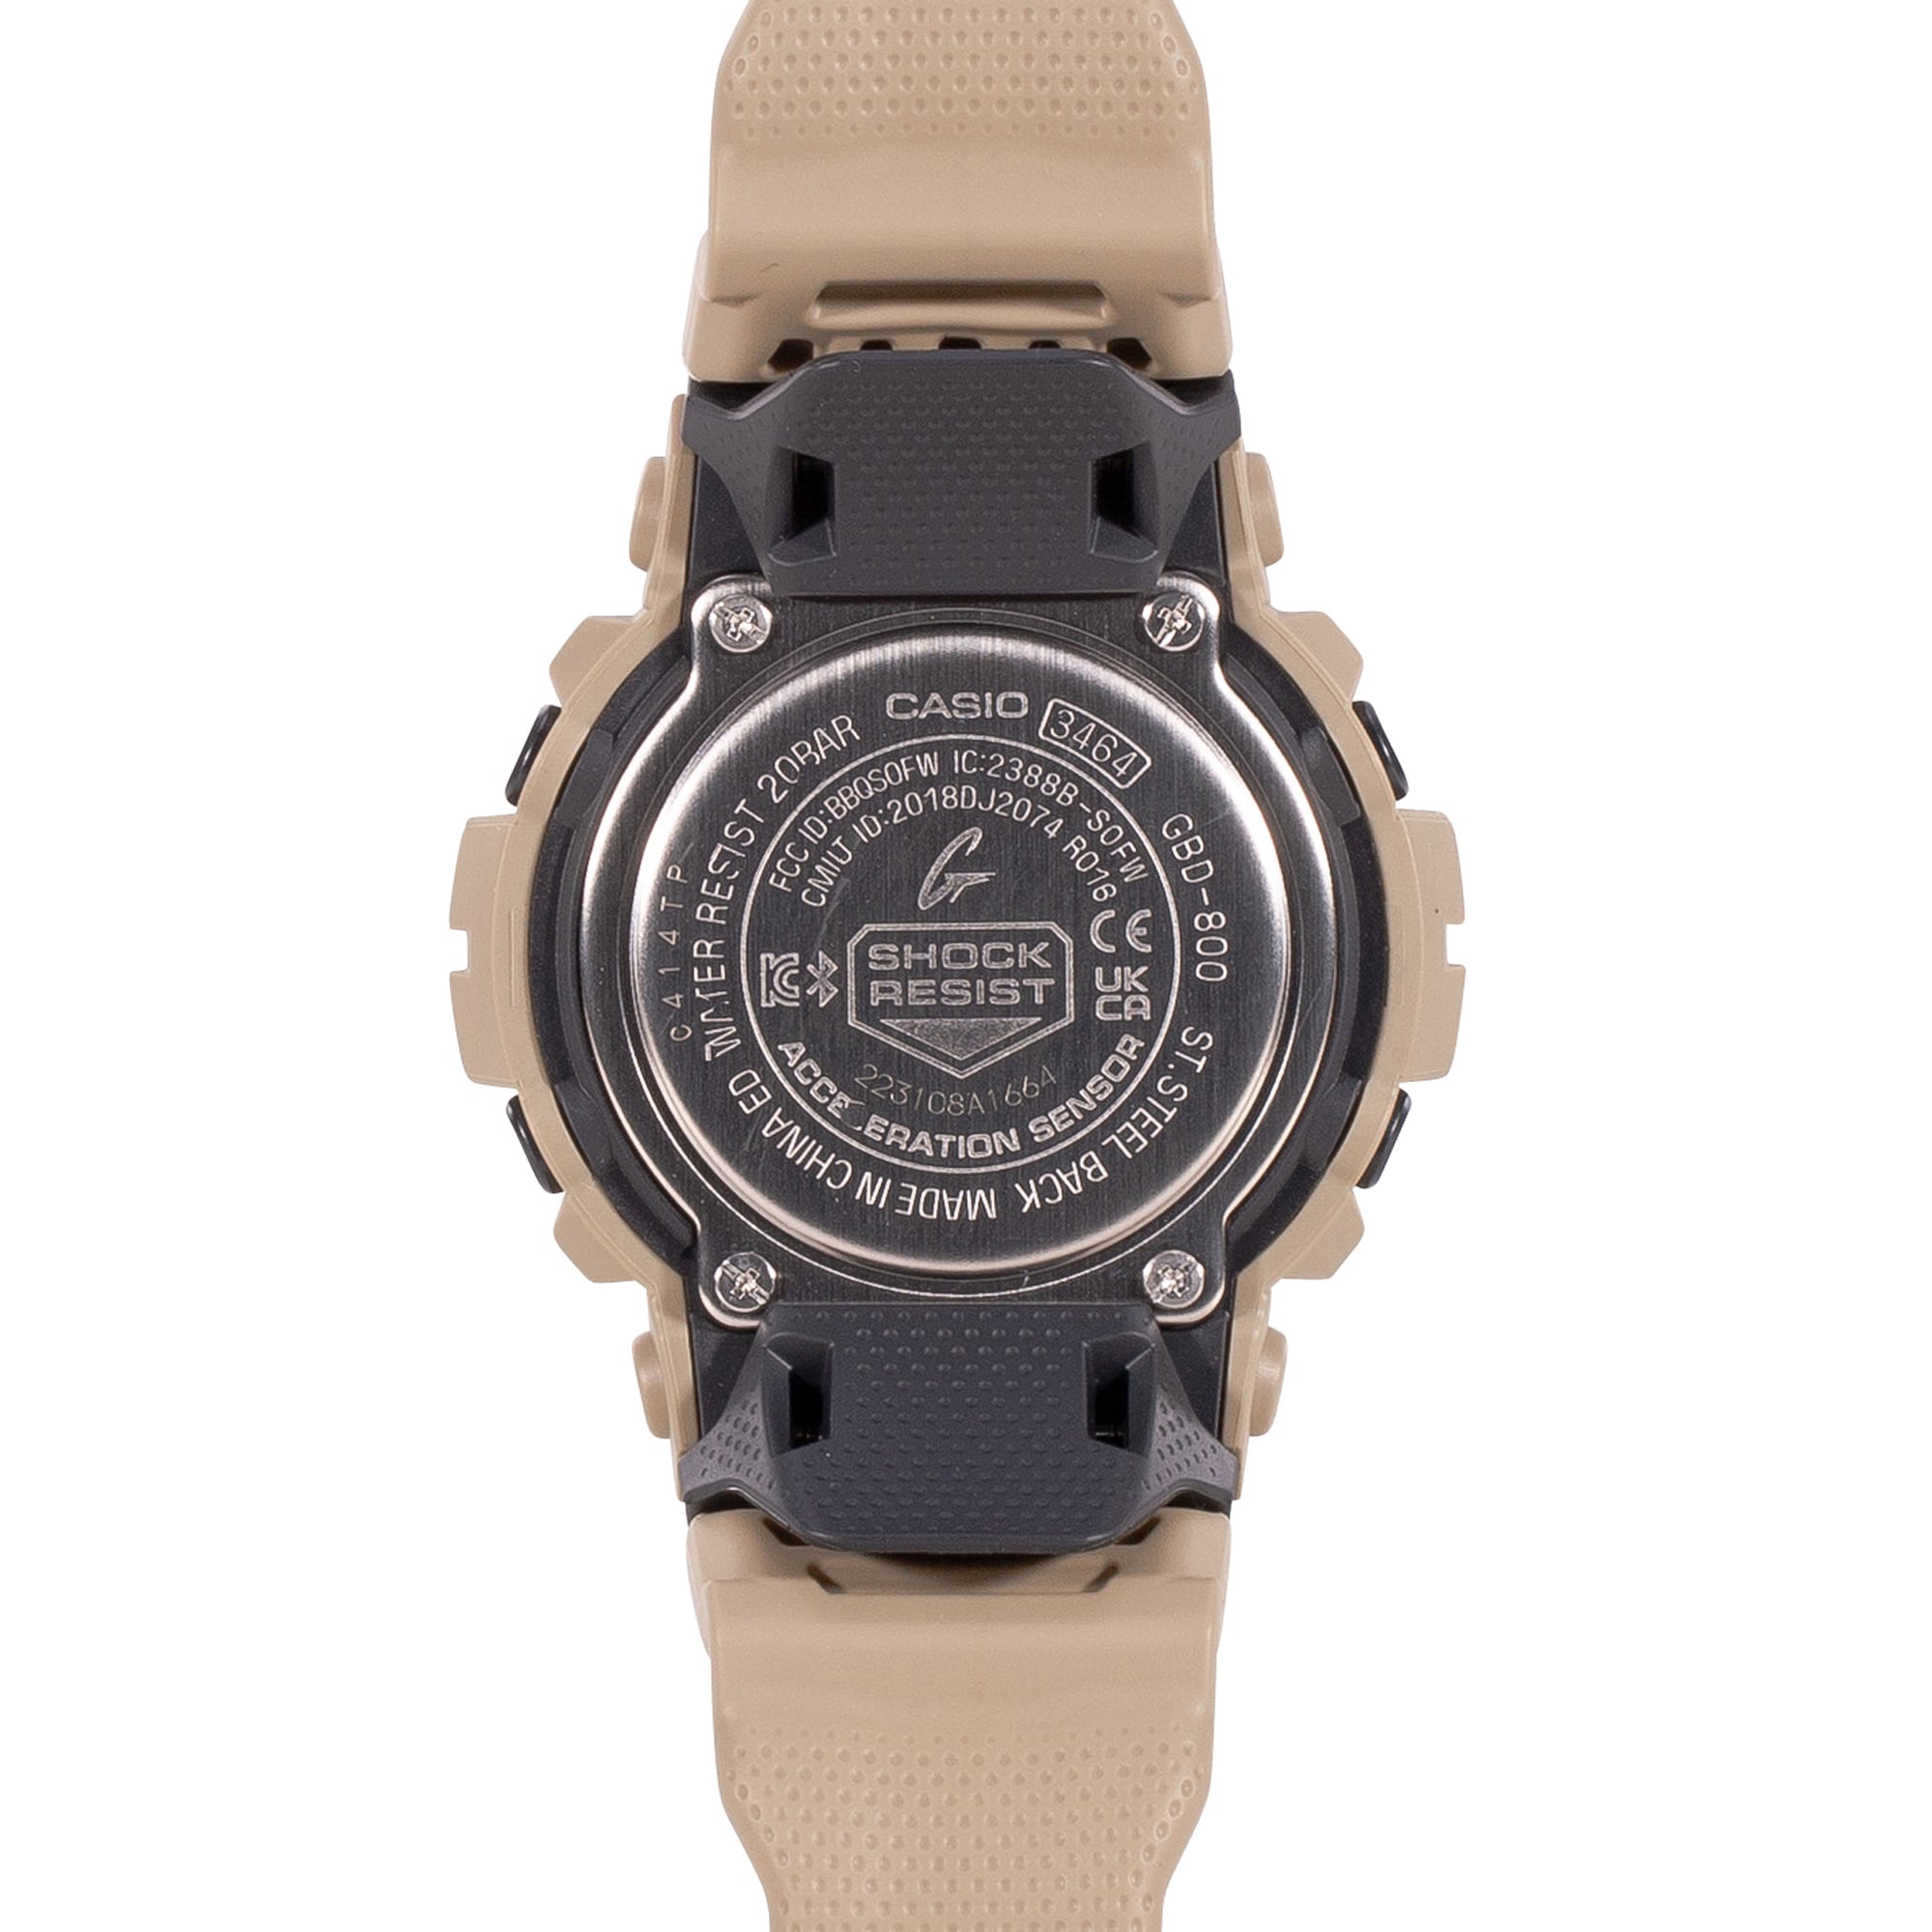 Purchase th Casio coyote by G-Shock G-Squad Watch GBD-800UC-5ER